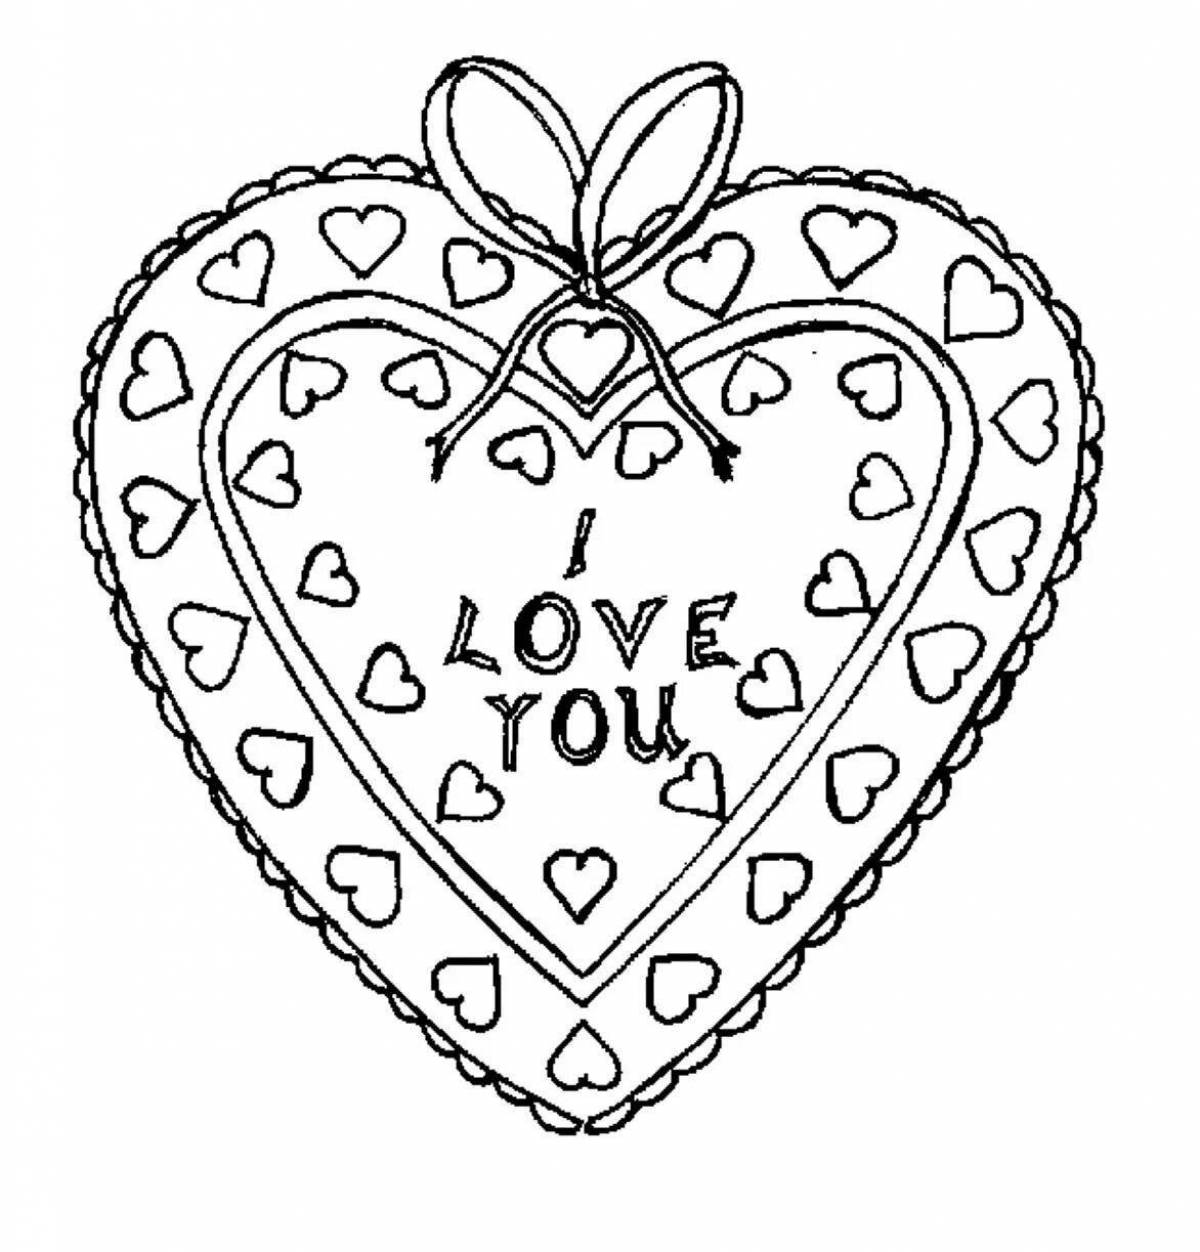 Cute heart coloring page for mom